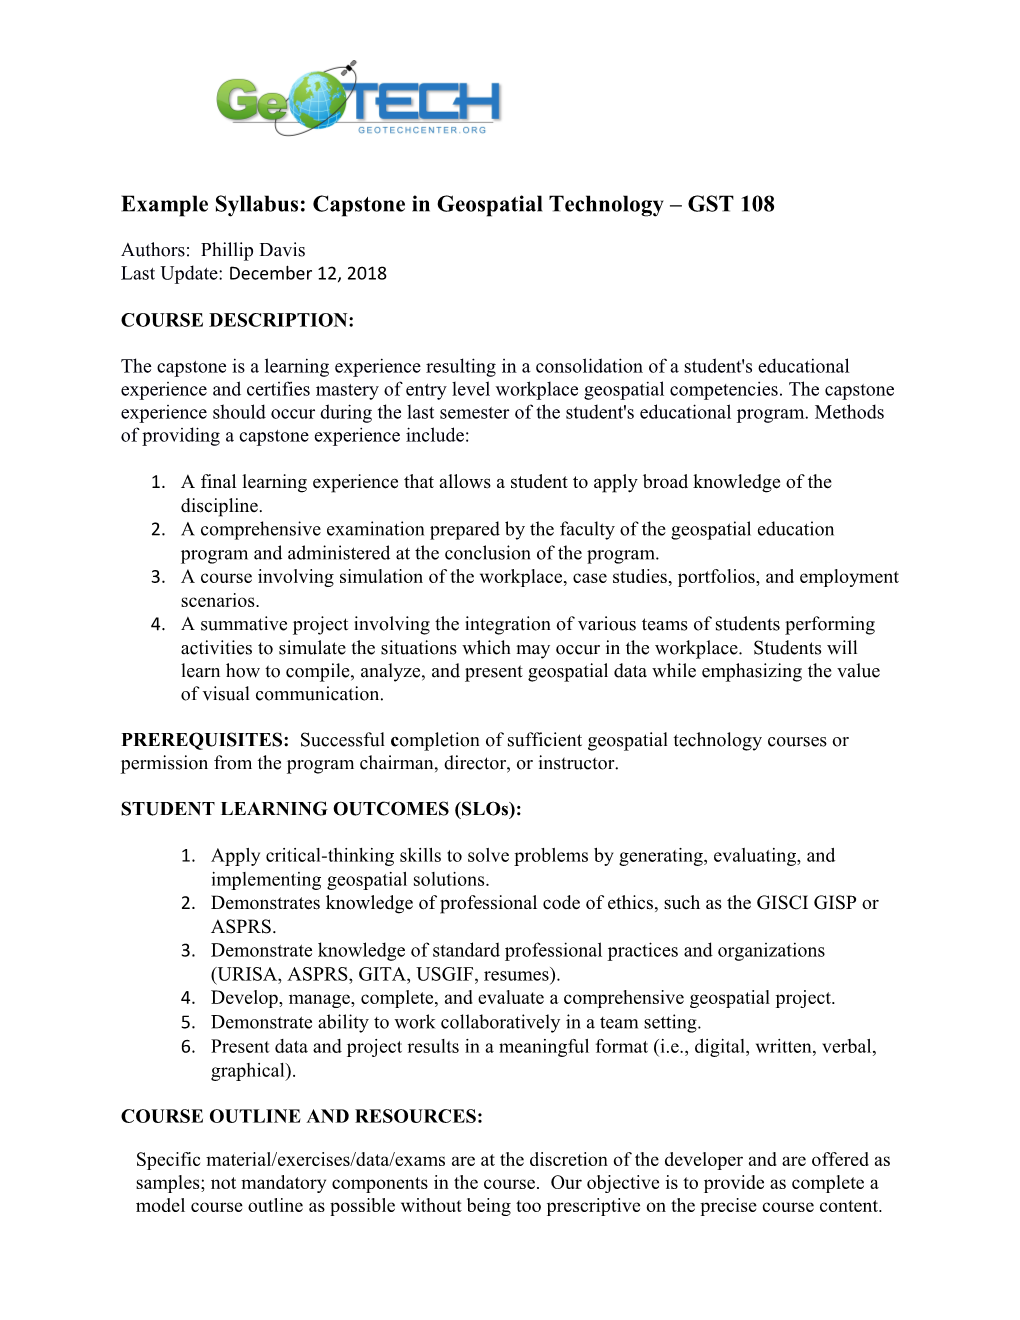 Example Syllabus: Capstone in Geospatial Technology GST 108